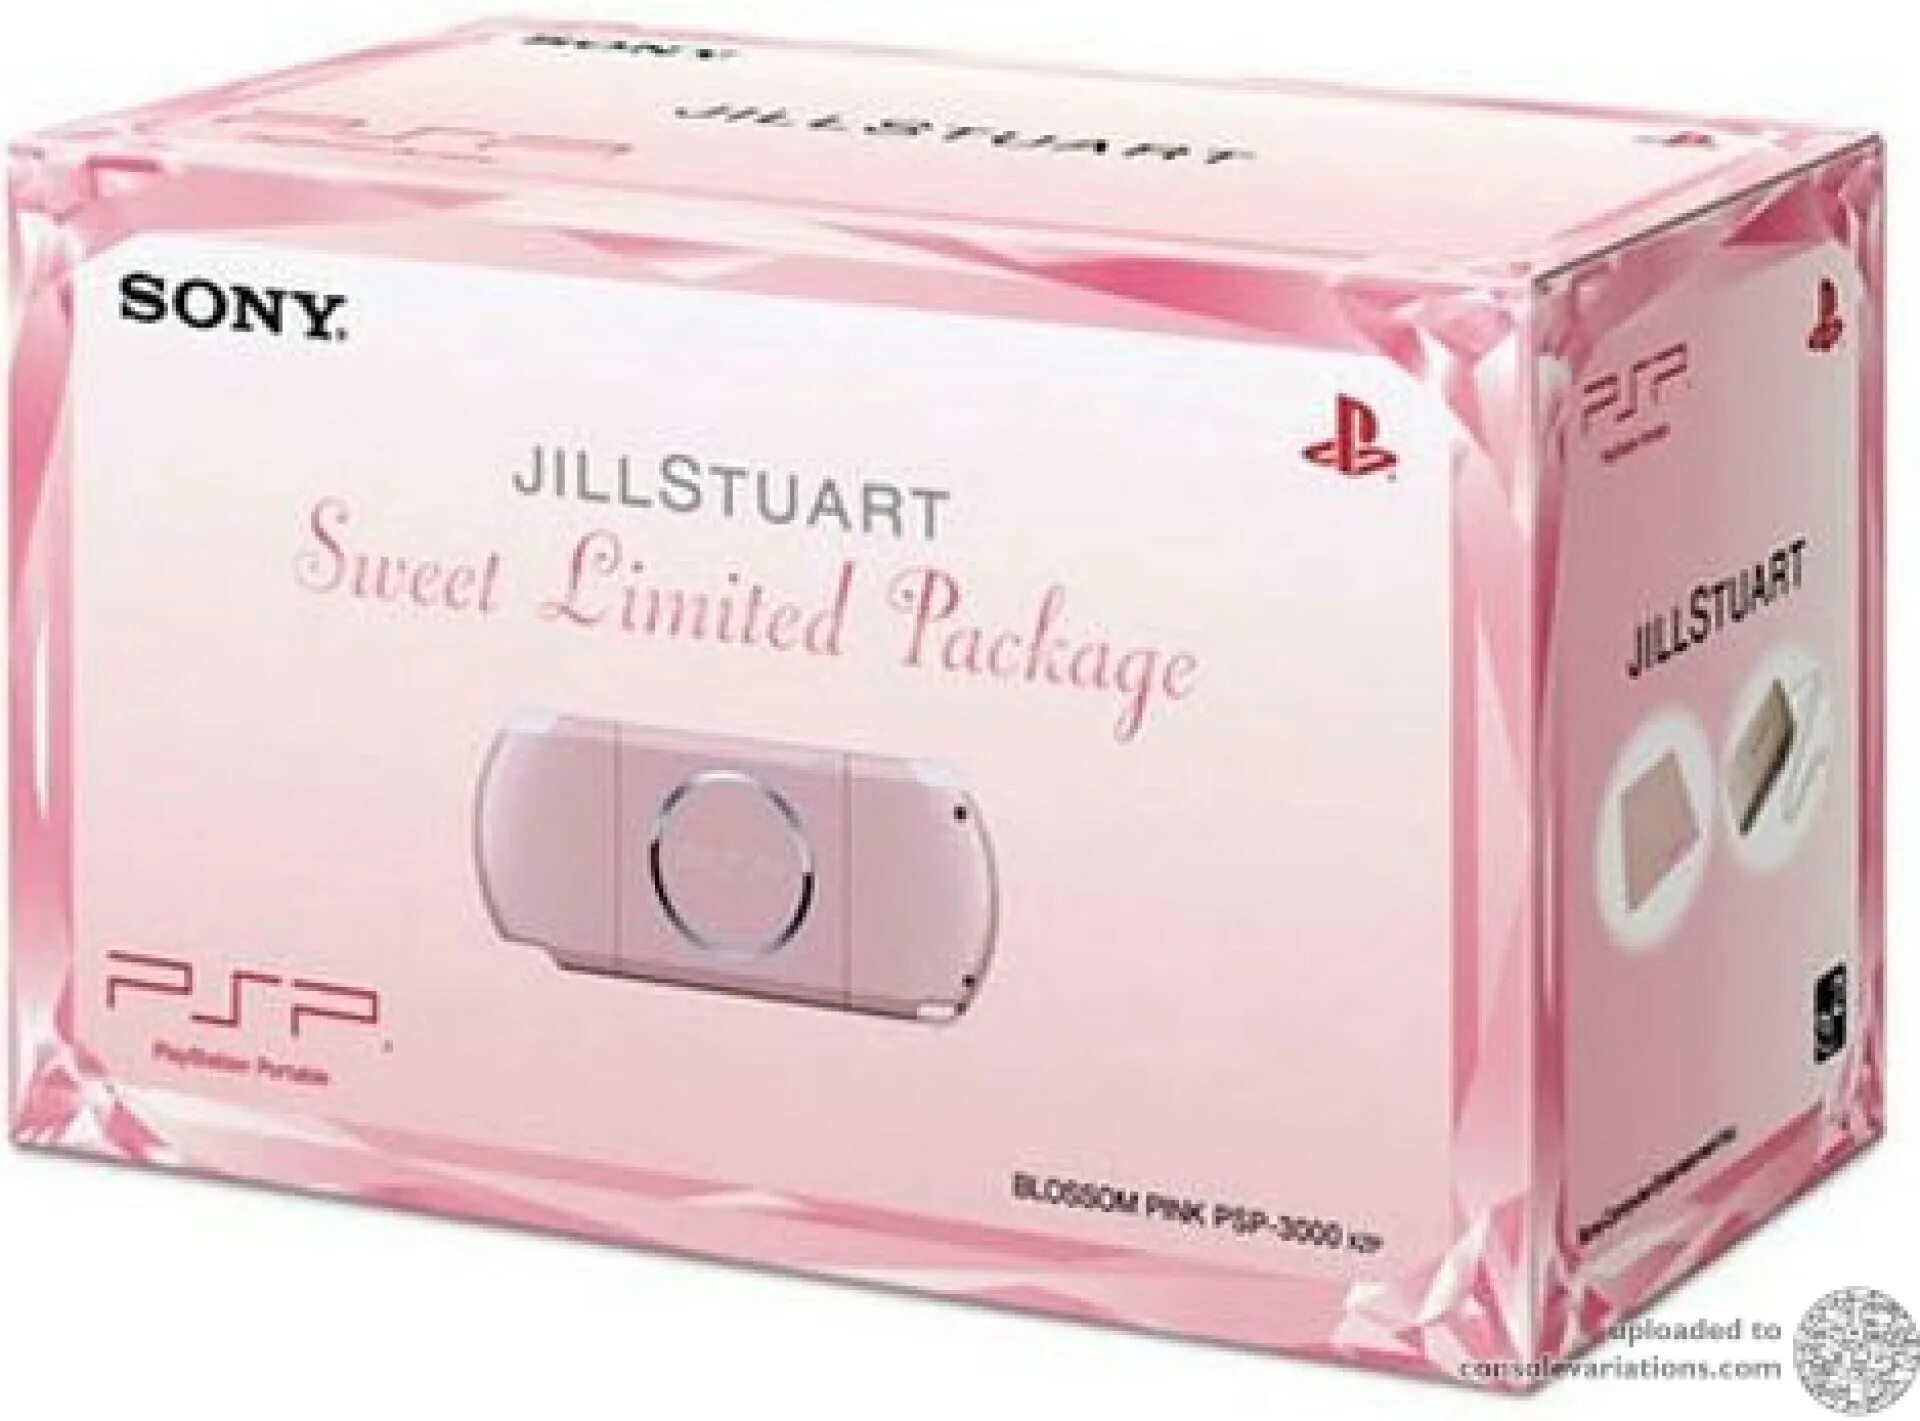 Sony PSP 3000 Jill Stuart Sweet Limited packag. PSP 3000 Box. PSP 3000 Limited Edition. Sony PSP made in Japan.